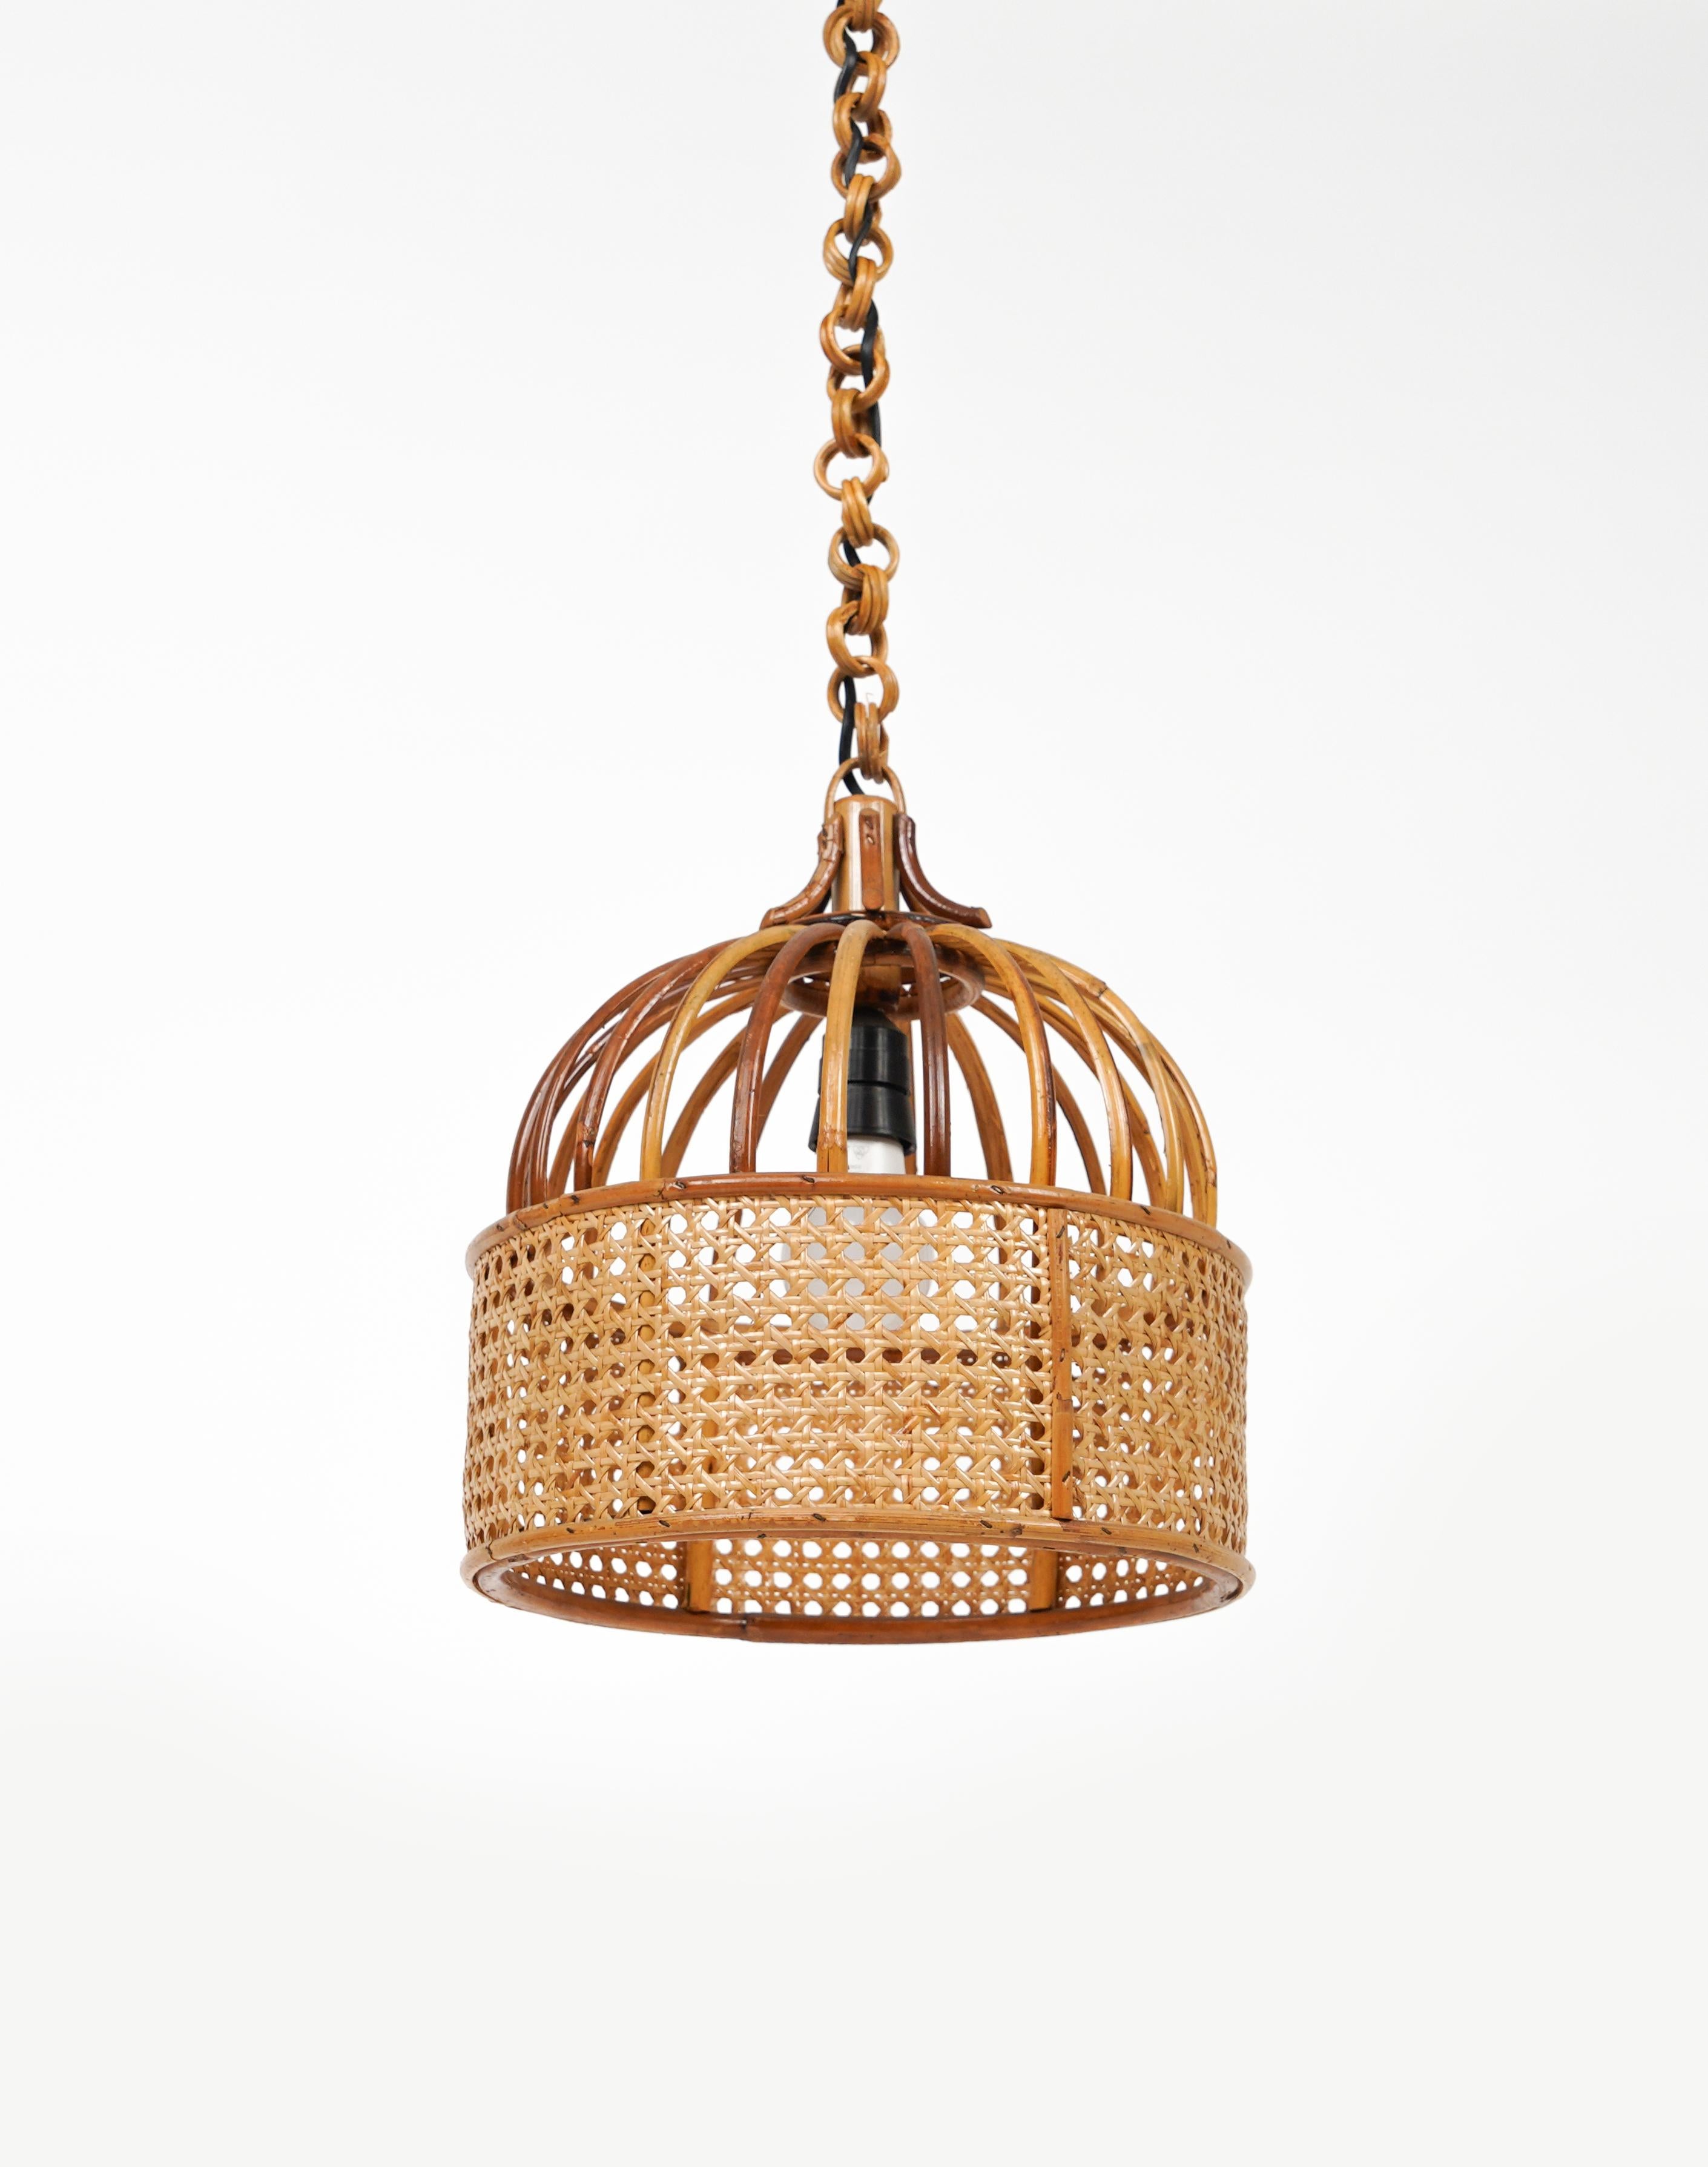 Mid-Century Modern Midcentury French Riviera Rattan and Wicker Chandelier, Italy 1970s For Sale